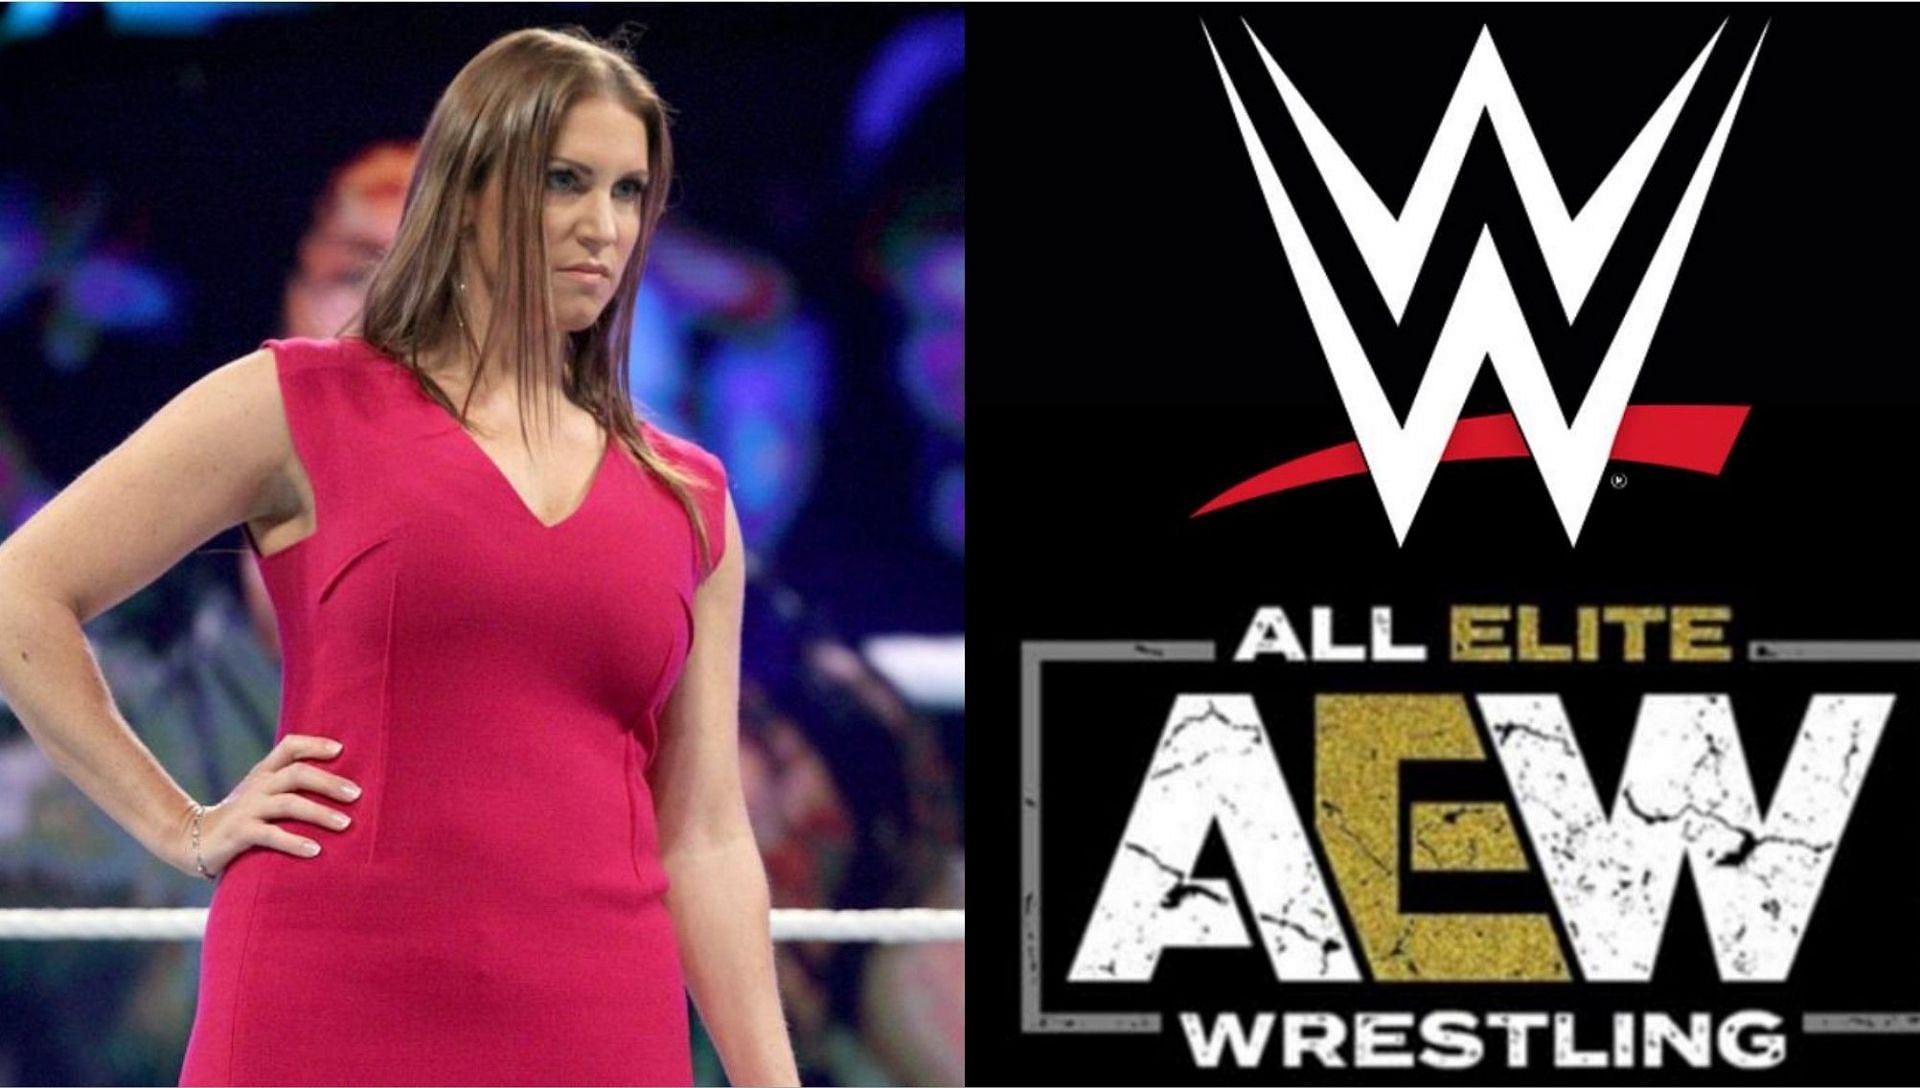 Will Stephanie McMahon bring back a top star?